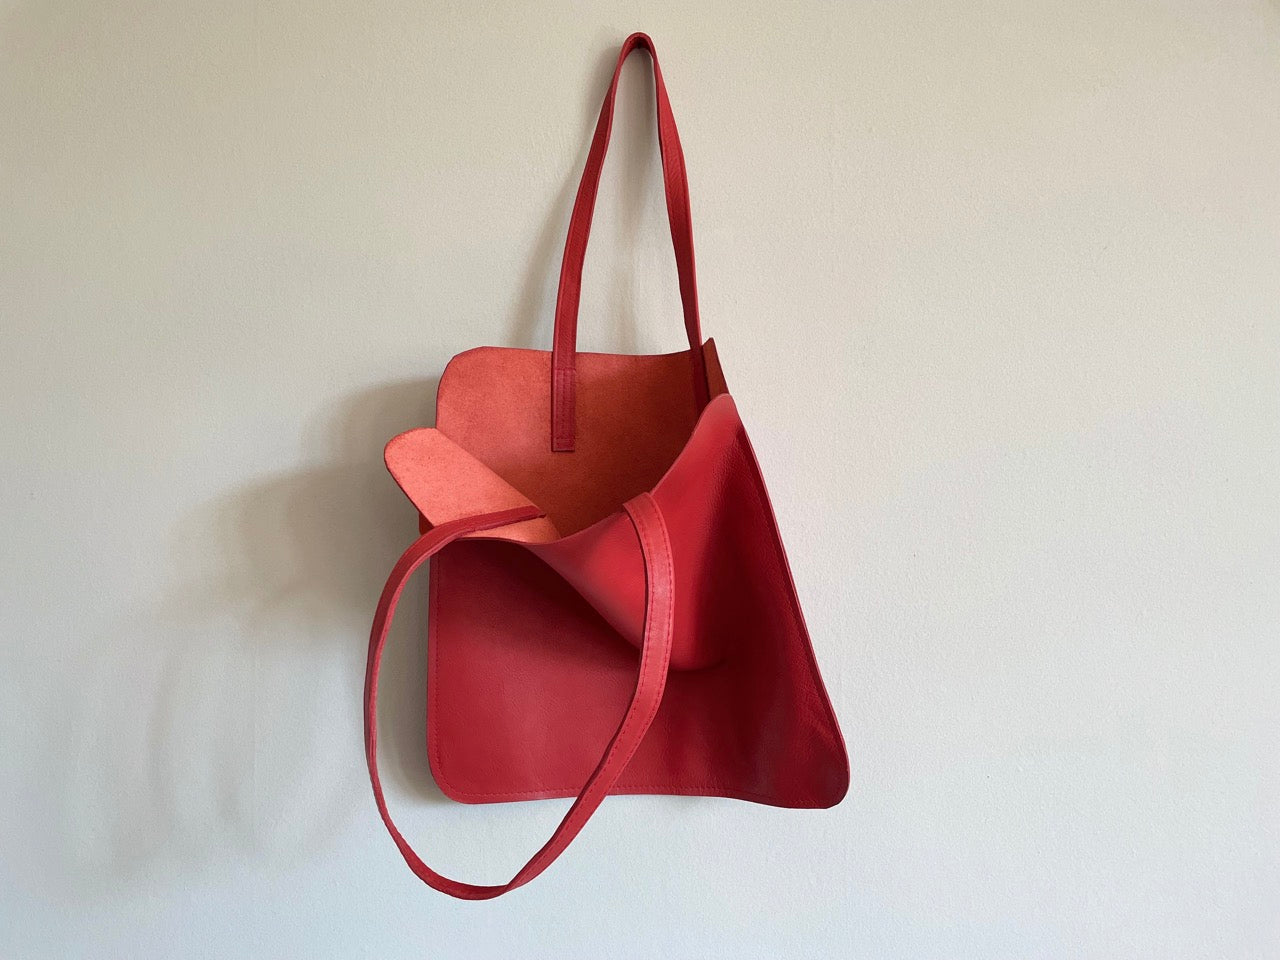 Marmalade Leather Tote Bag - Colour: Red